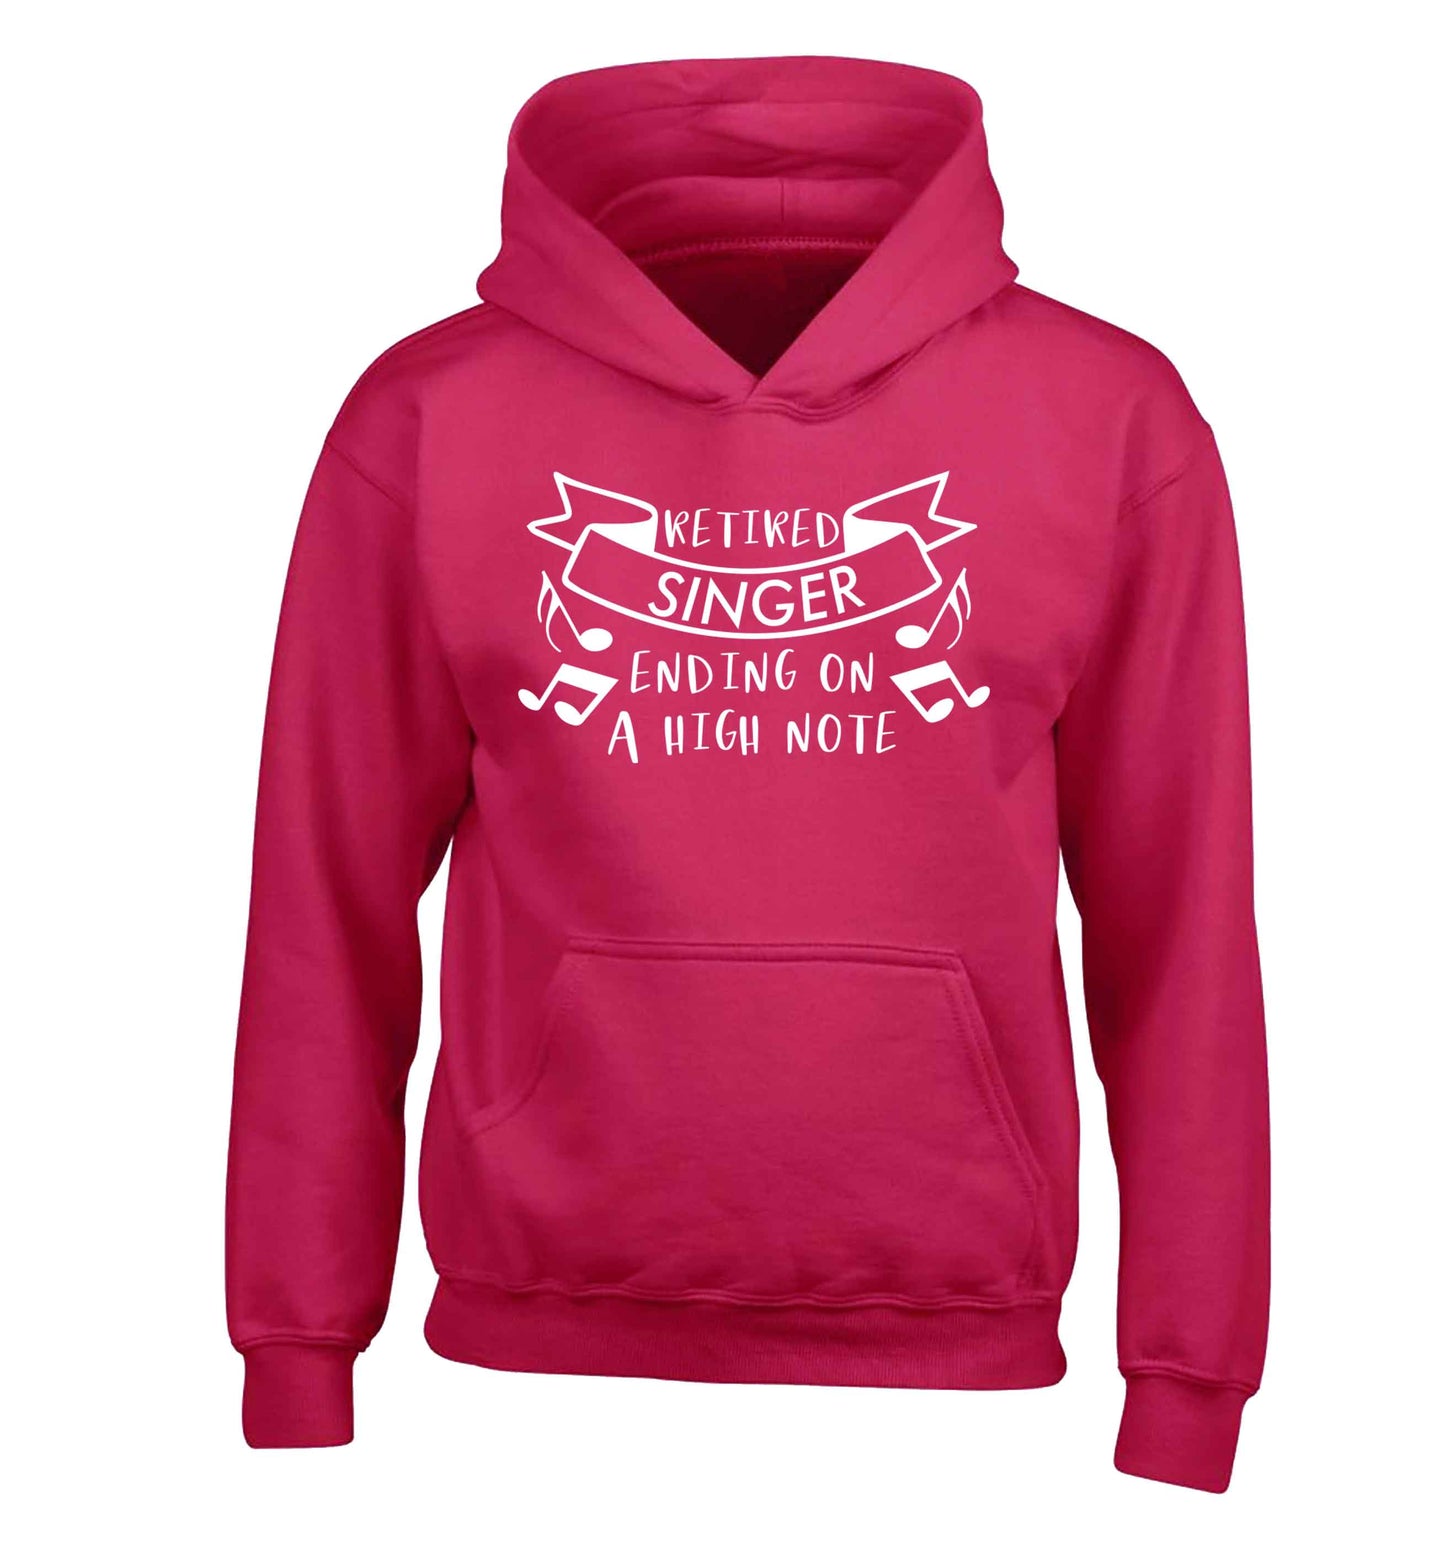 Retired singer ending on a high note children's pink hoodie 12-13 Years